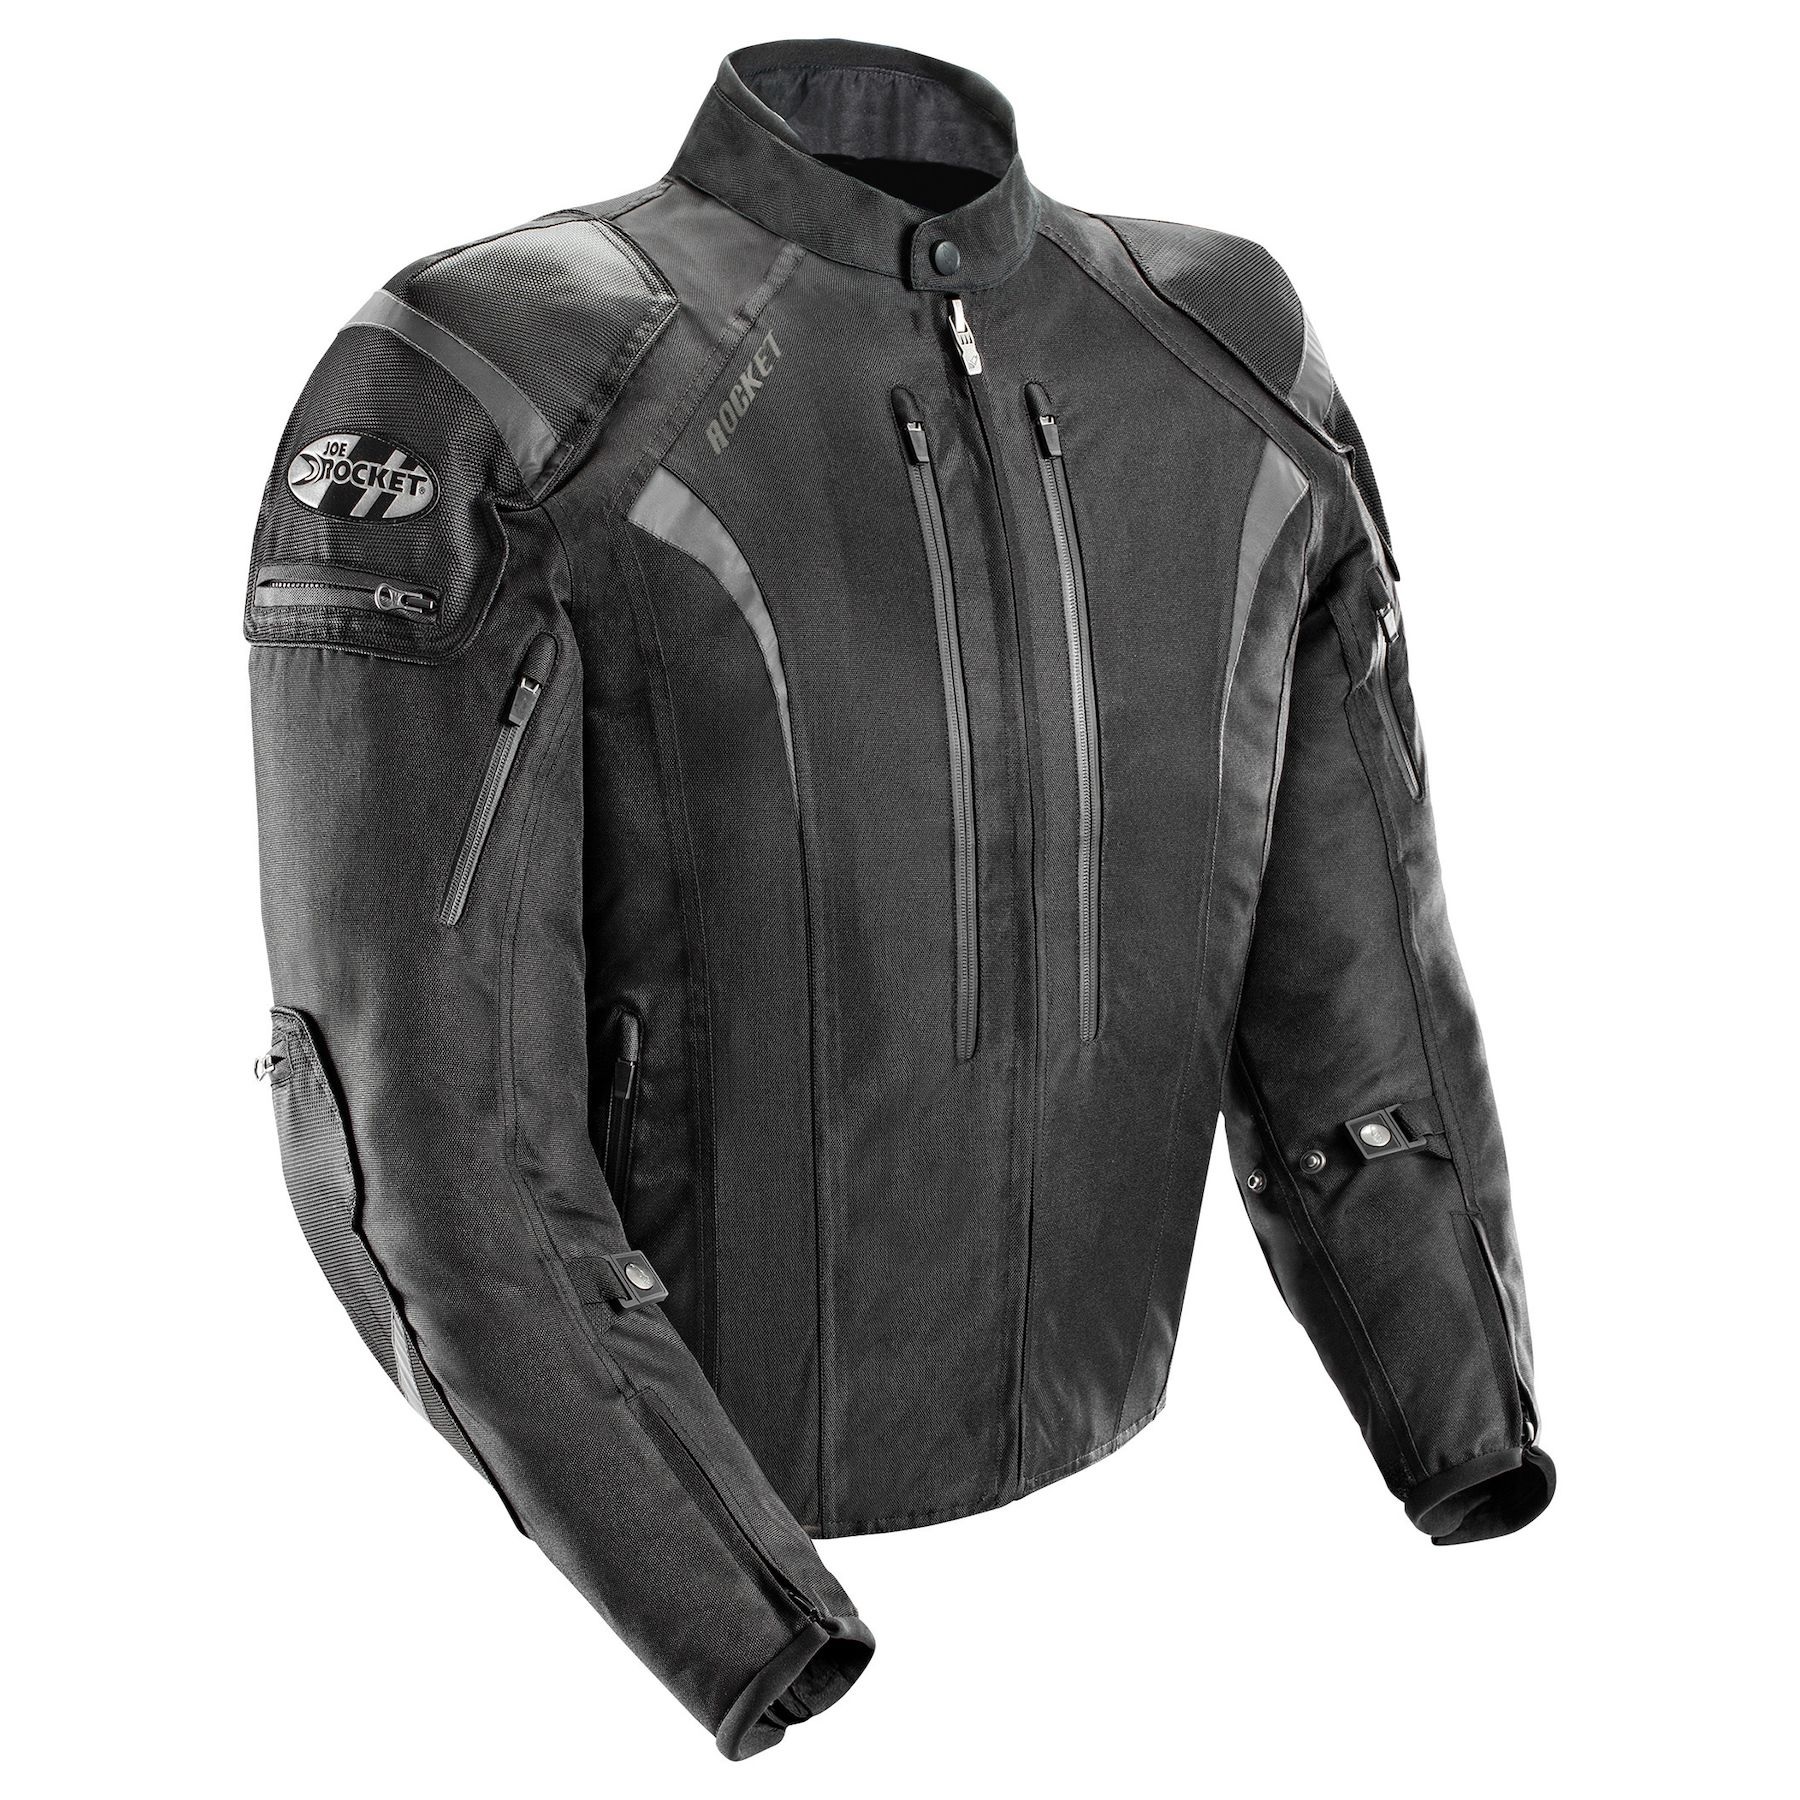 The Best Motorcycle Jackets You Can, Best Leather Motorcycle Jackets 2020